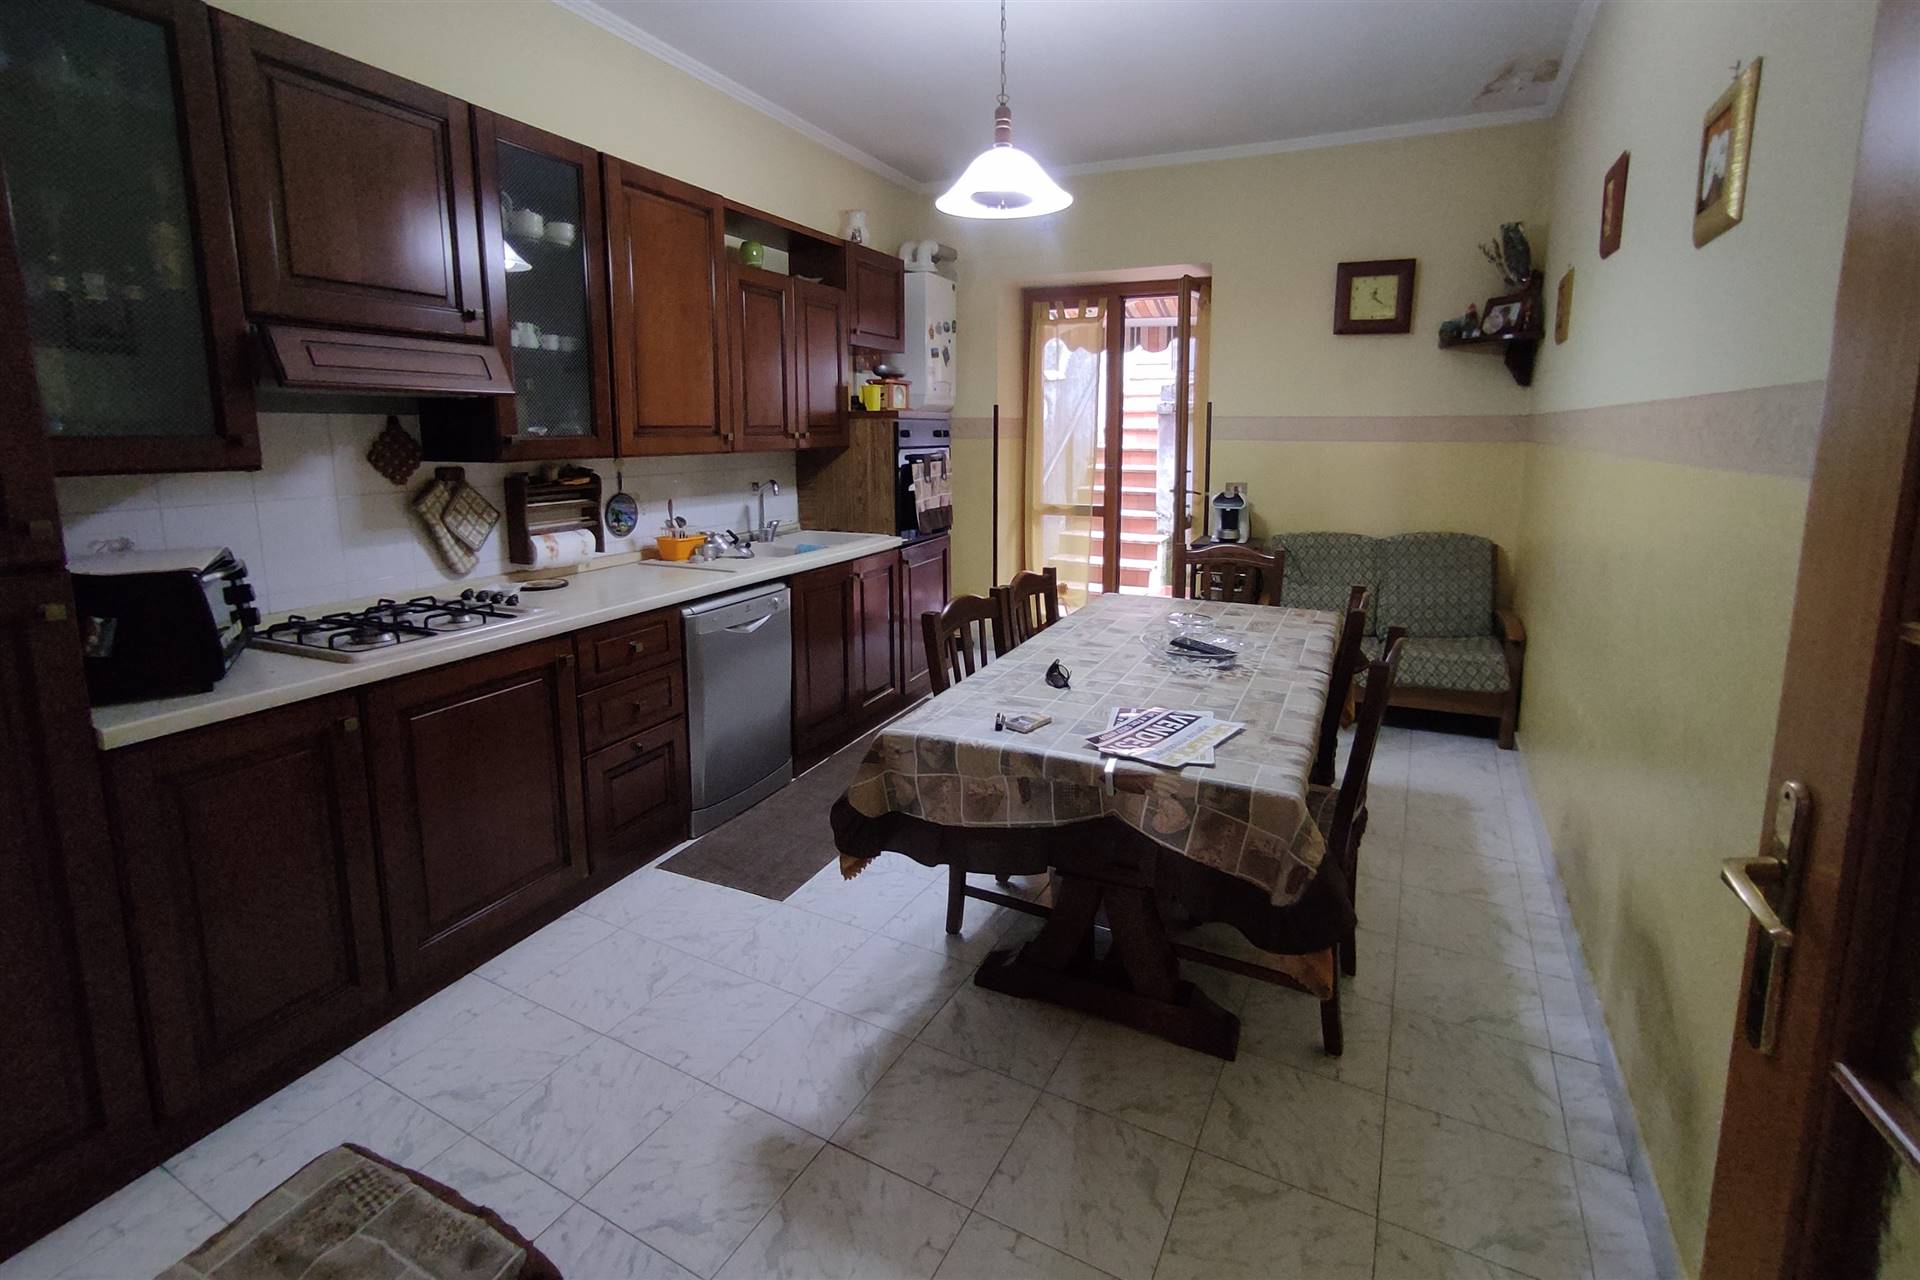 BAGNOLI IRPINO, Apartment for sale of 80 Sq. mt., Excellent Condition, Heating Individual heating system, Energetic class: F, placed at 1° on 1, 